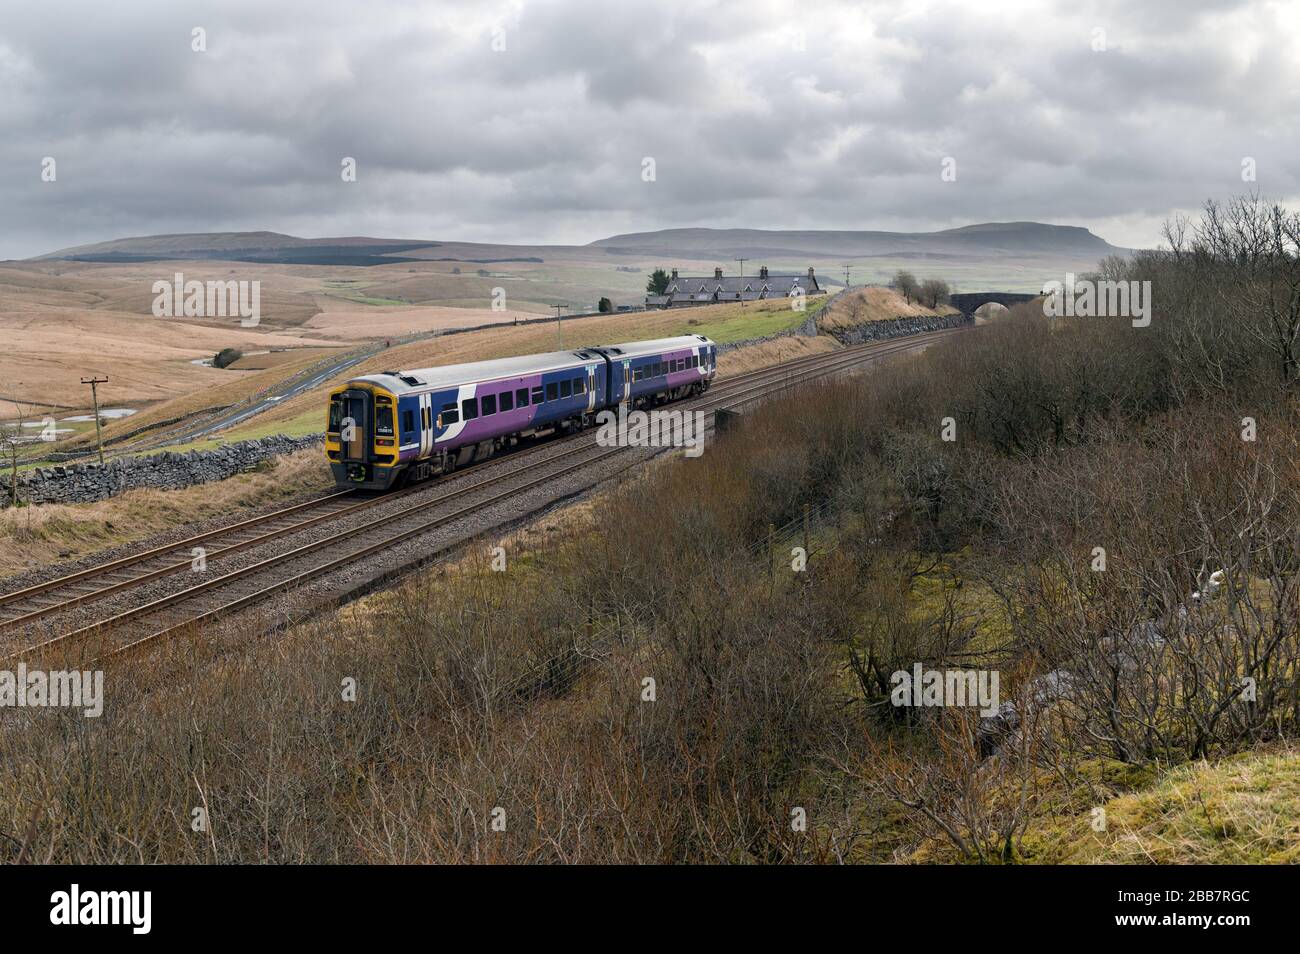 A Sprinter passenger train bound for Leeds passes Salt Lake Cottages near the head of Ribblesdale, on the Settle-Carlisle railway line. Stock Photo